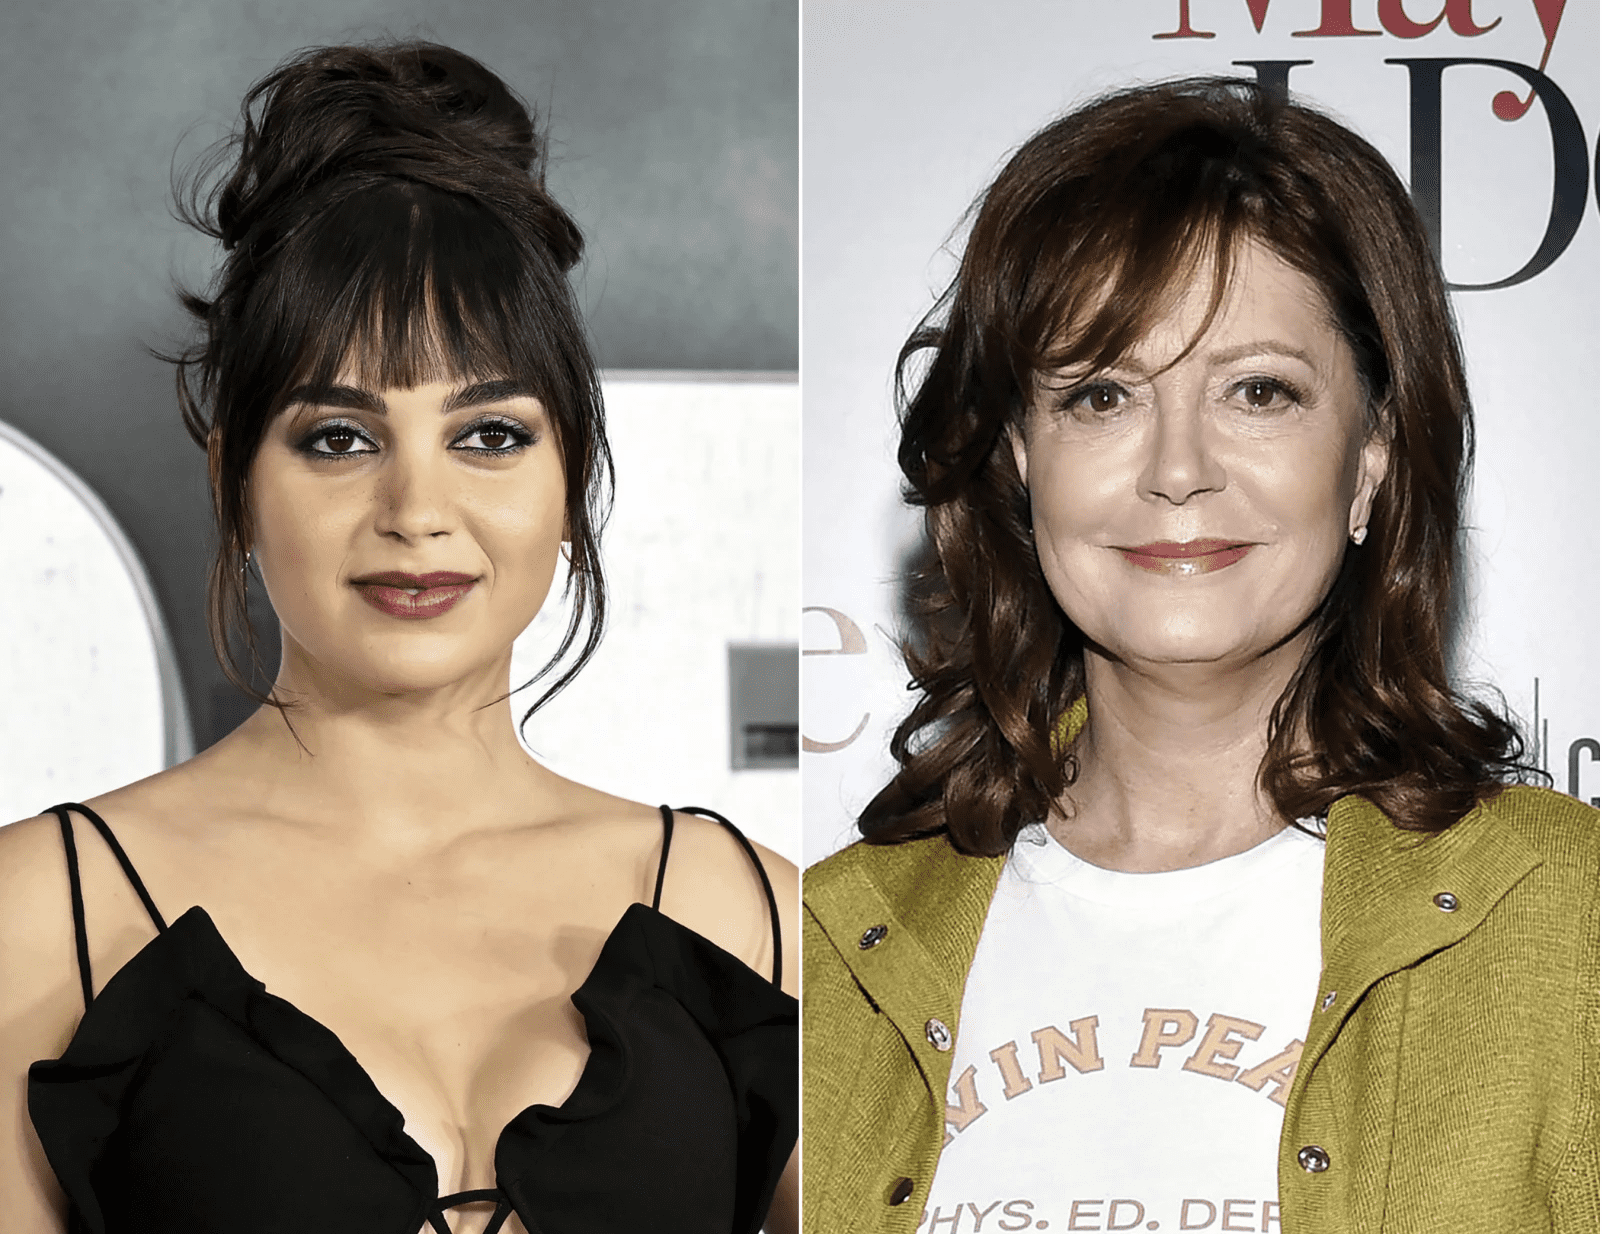 Melissa Barrera, left, and Susan Sarandon, right. Sarandon and Barrera were each dropped by Hollywood companies after making comments on the Israeli war on Gaza that some wrongly deemed antisemitic